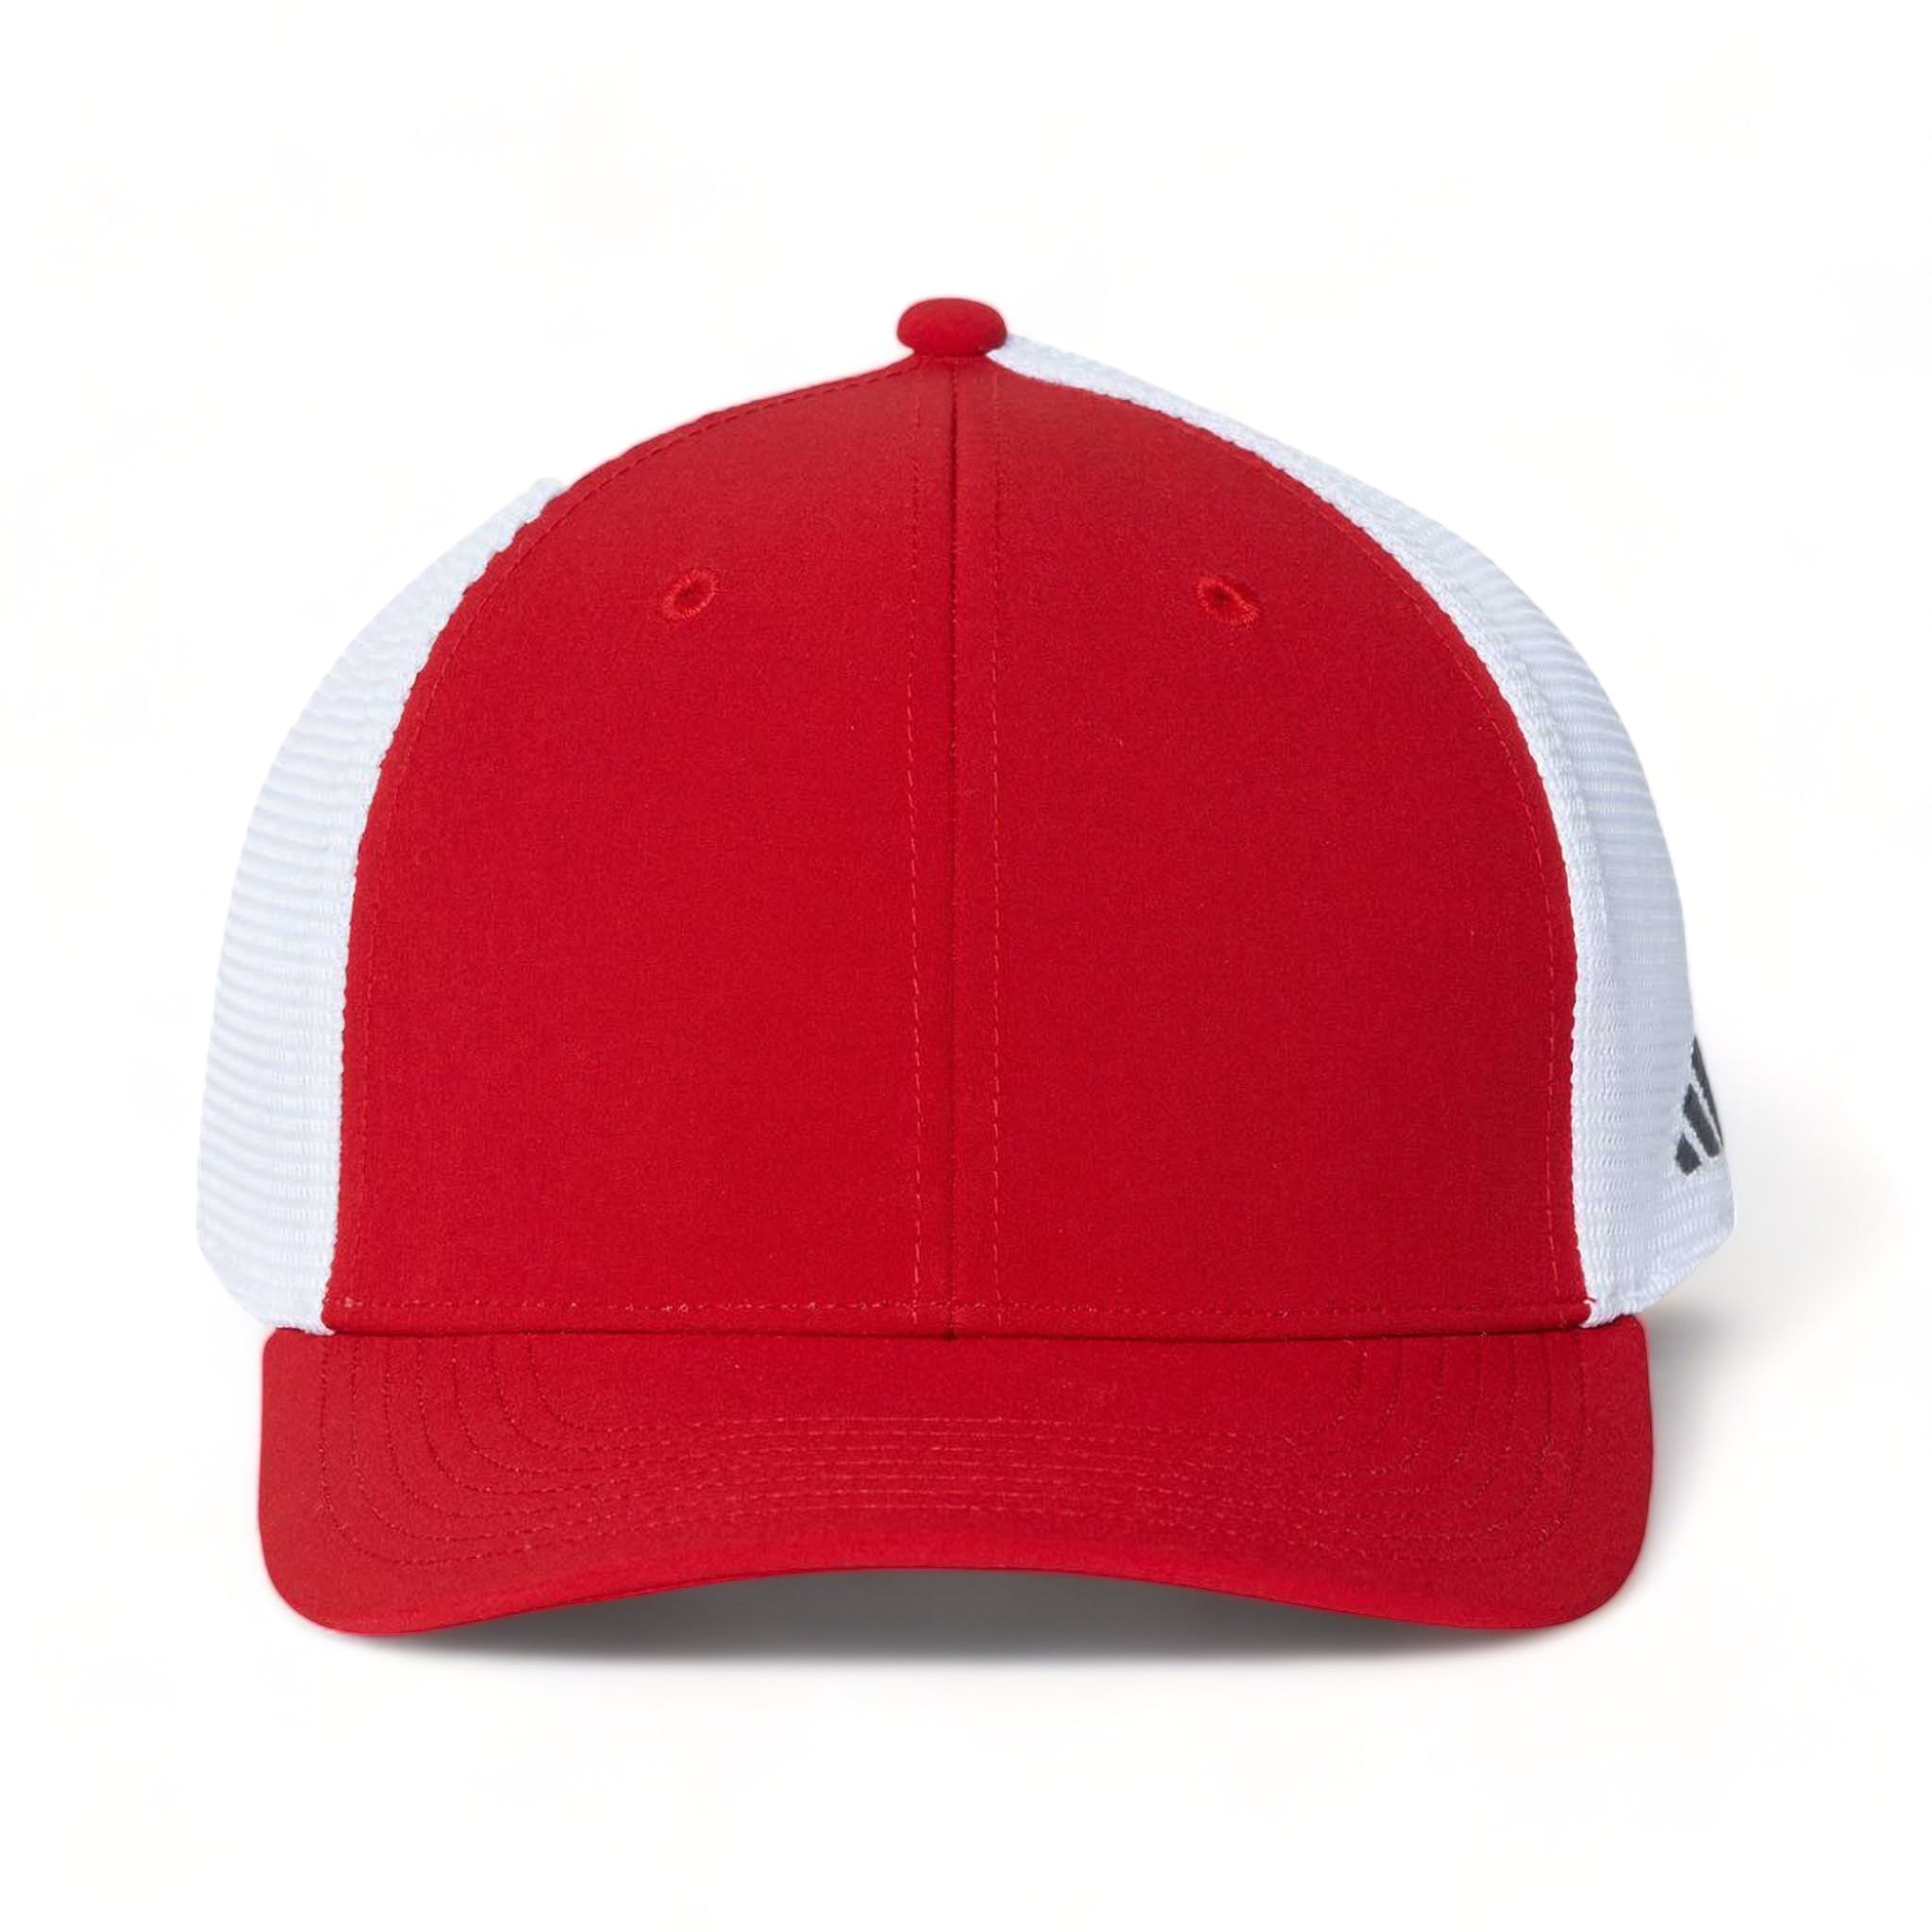 Front view of Adidas A627S custom hat in power red